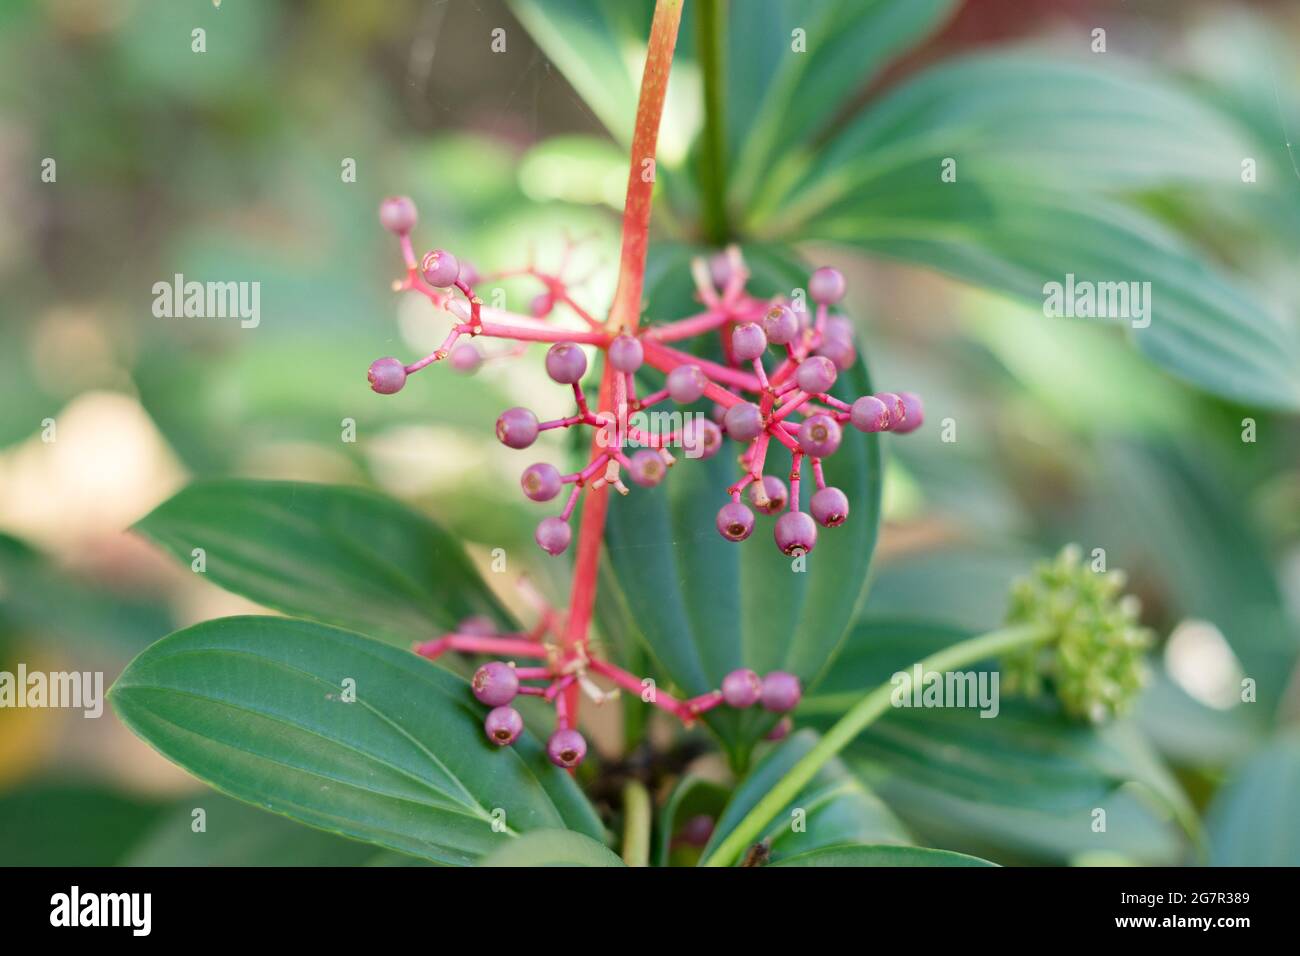 Closeup with shallow depth of field of Indonesian parijoto or Medinilla speciosa purple berry and flowers with green bokeh background Stock Photo